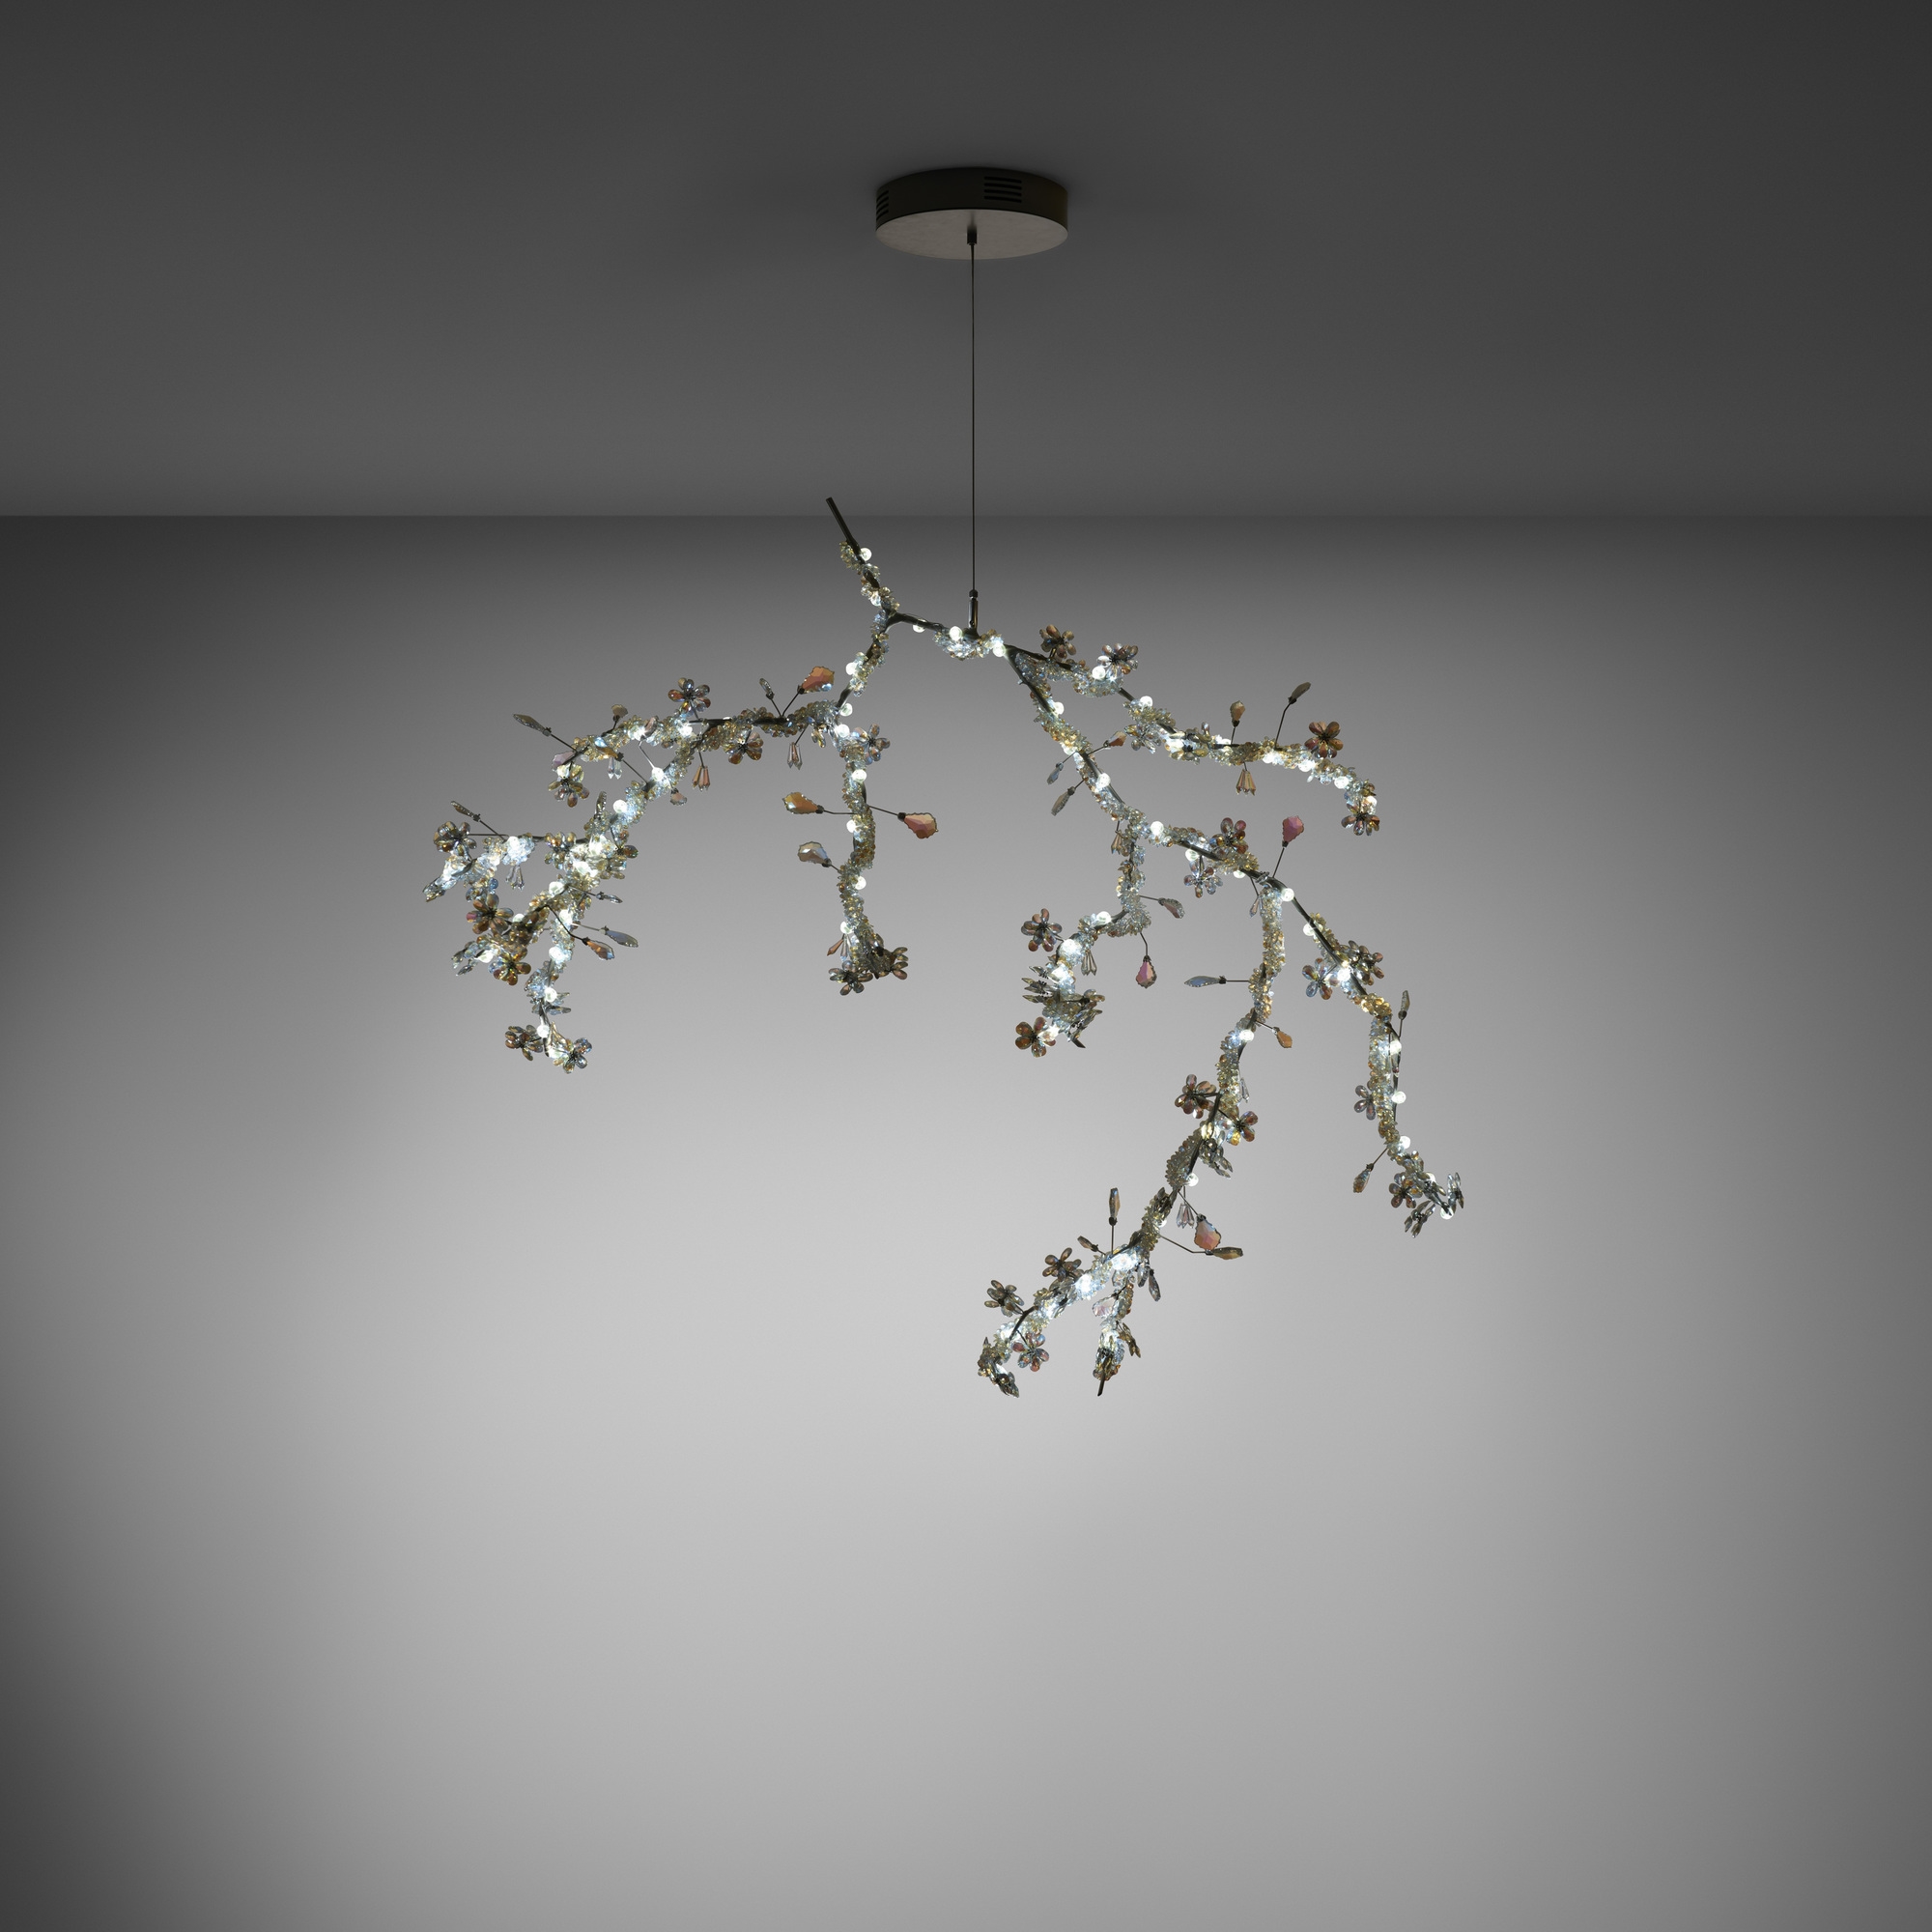 Blossom chandelier by Tord Boontje, 2002